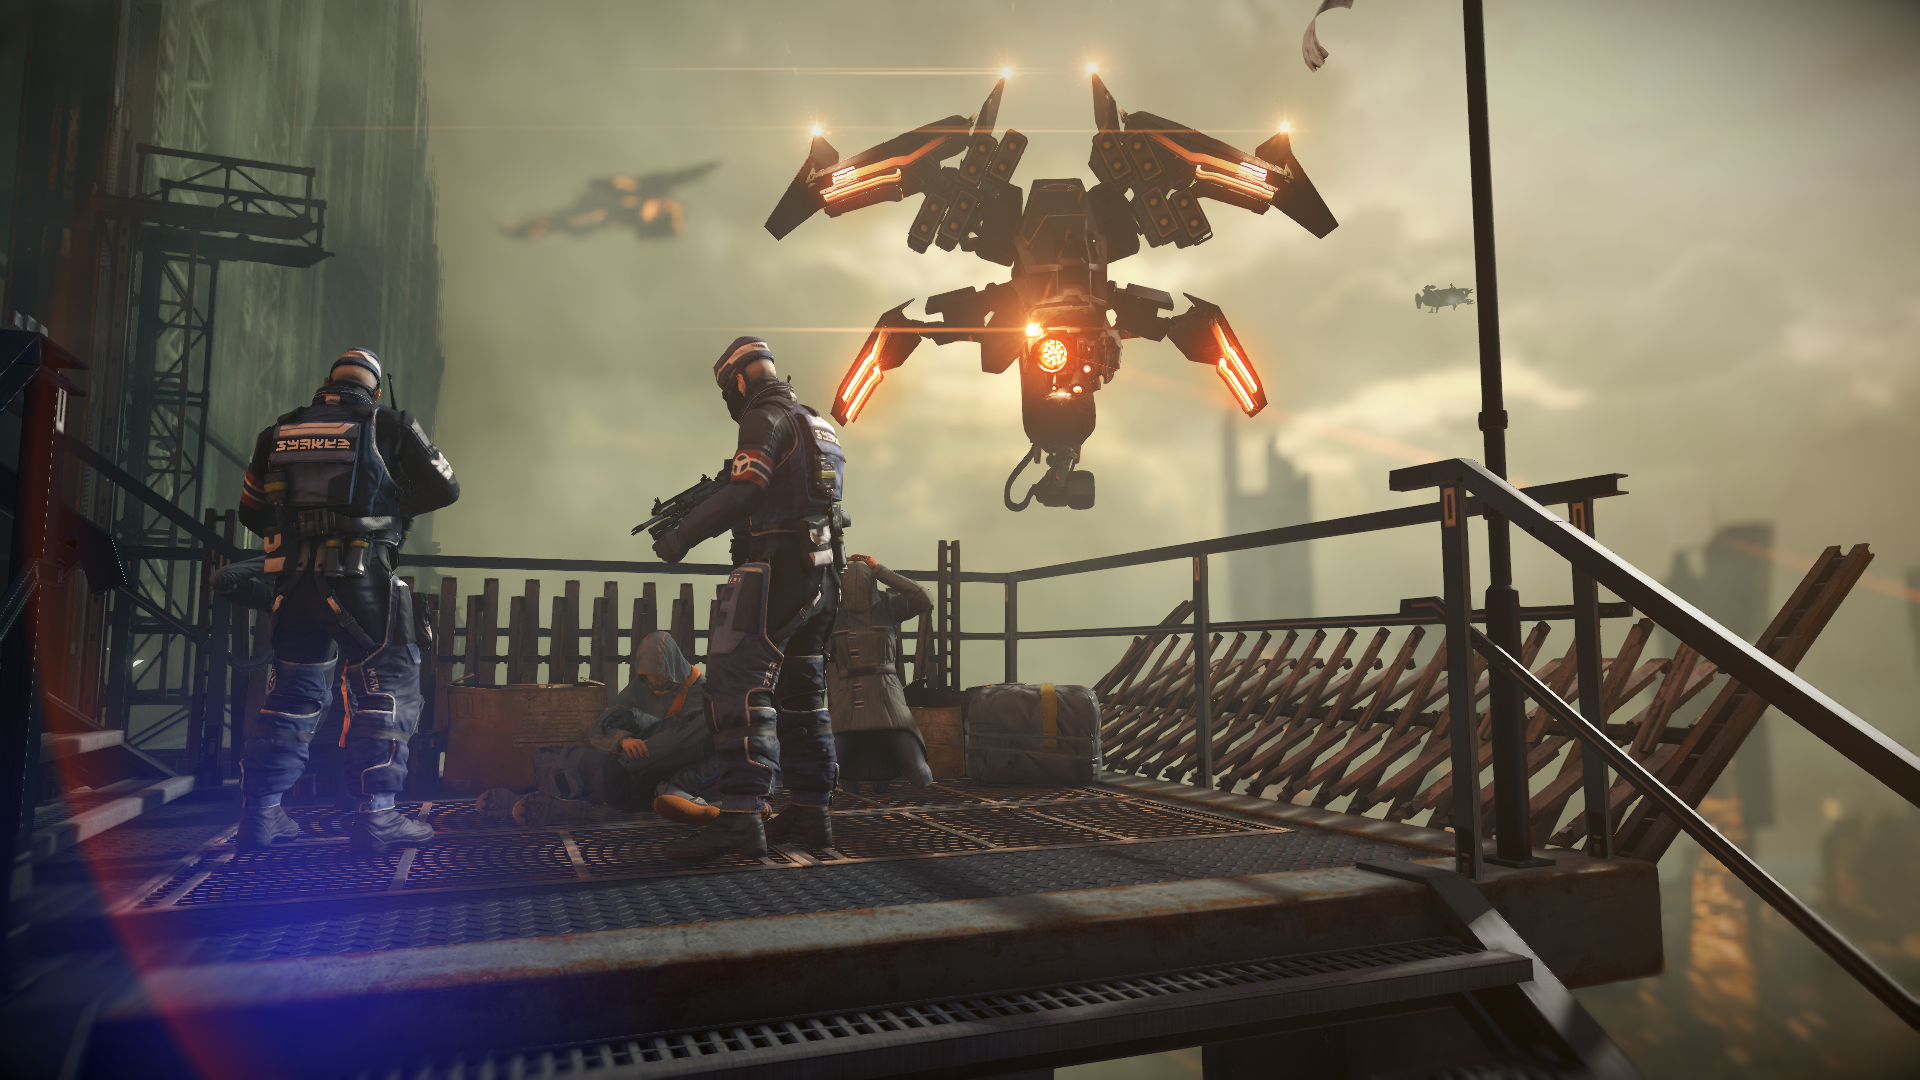 Killzone Shadow Fall adds in-game currency alternative to microtransactions